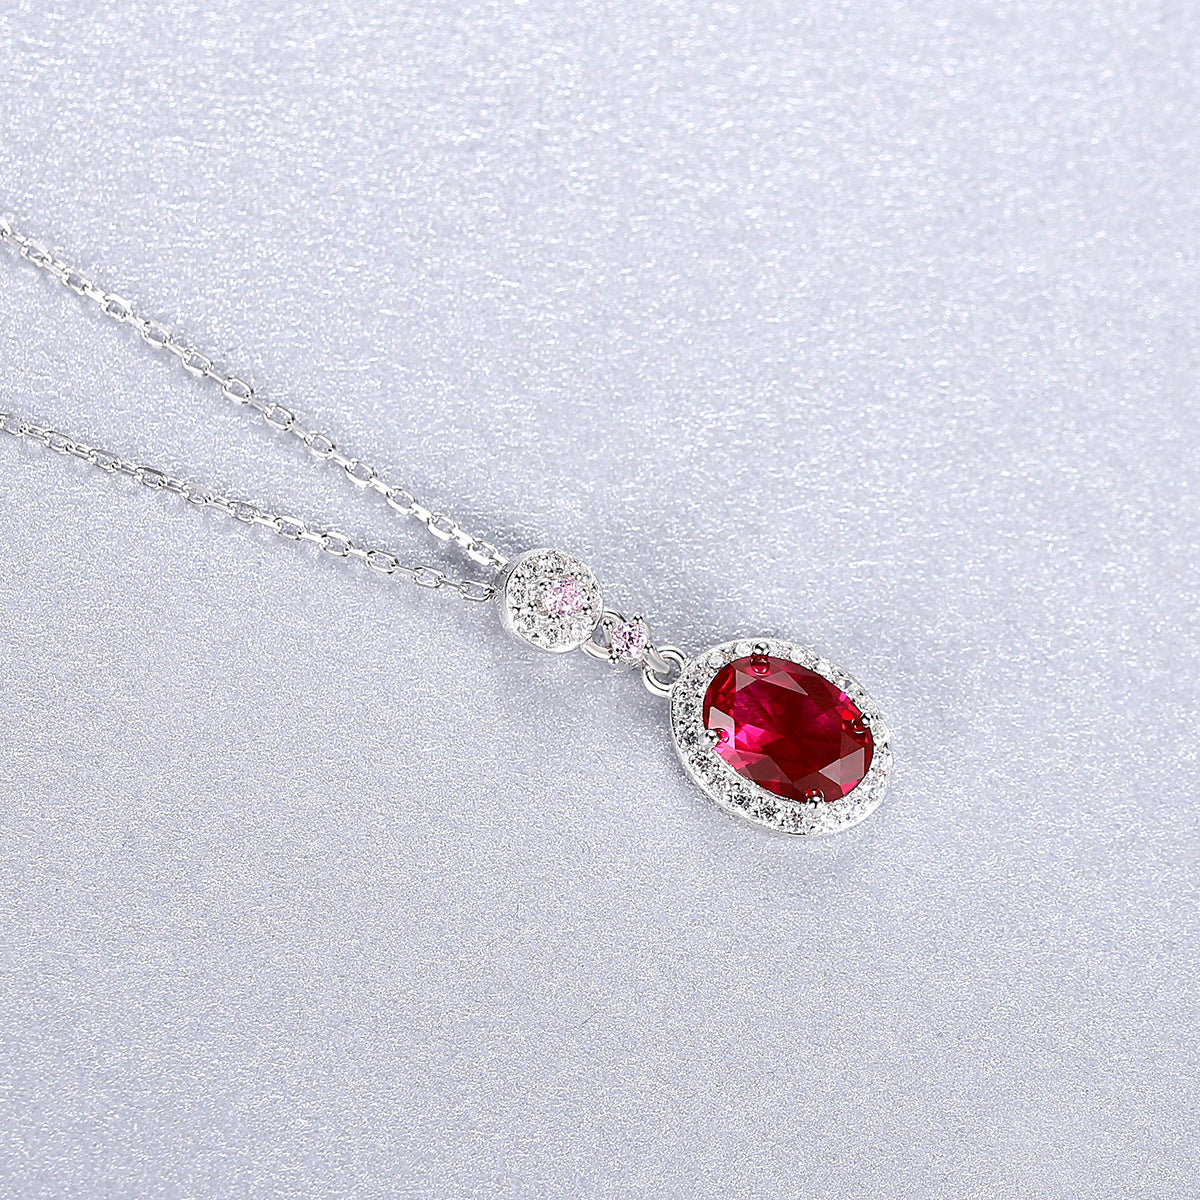 Gemstonely- Elegant and Sophisticated: S925 Silver Necklace with Simulate Ruby Pendant for Women in a Unique and Trendy Design